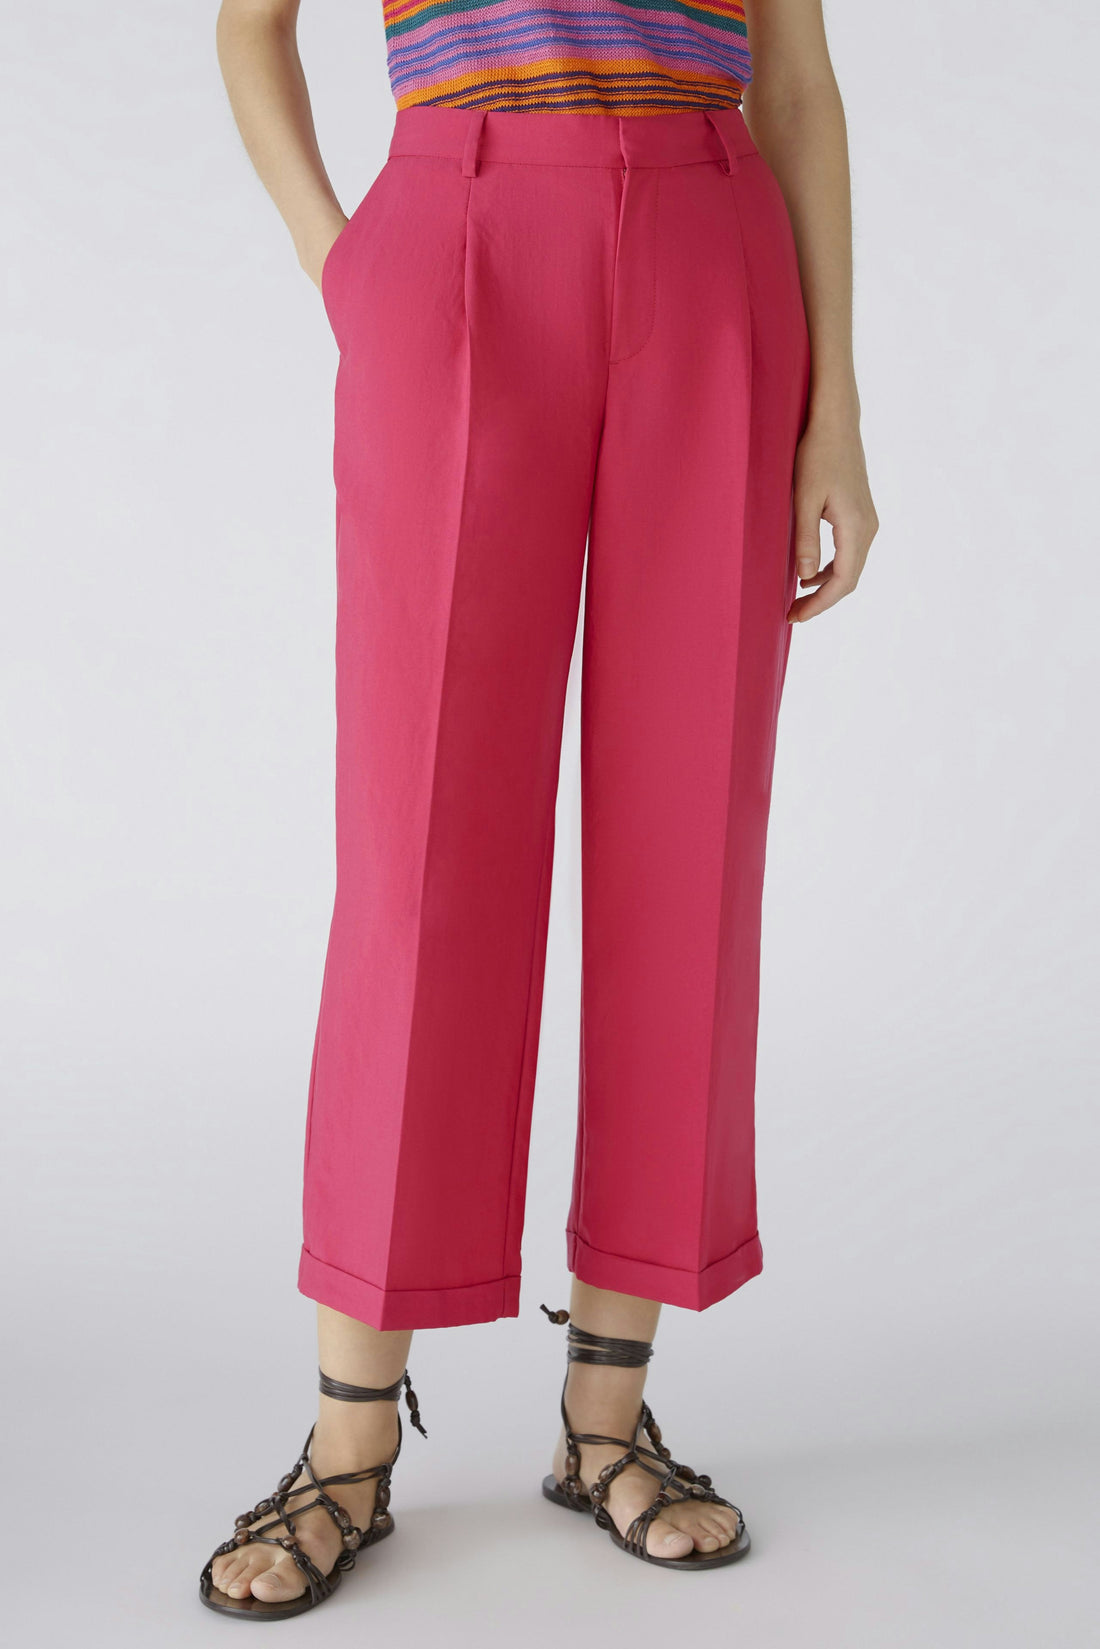 Culotte Style Dress Trousers In Lyocell Blend_87580_3438_02